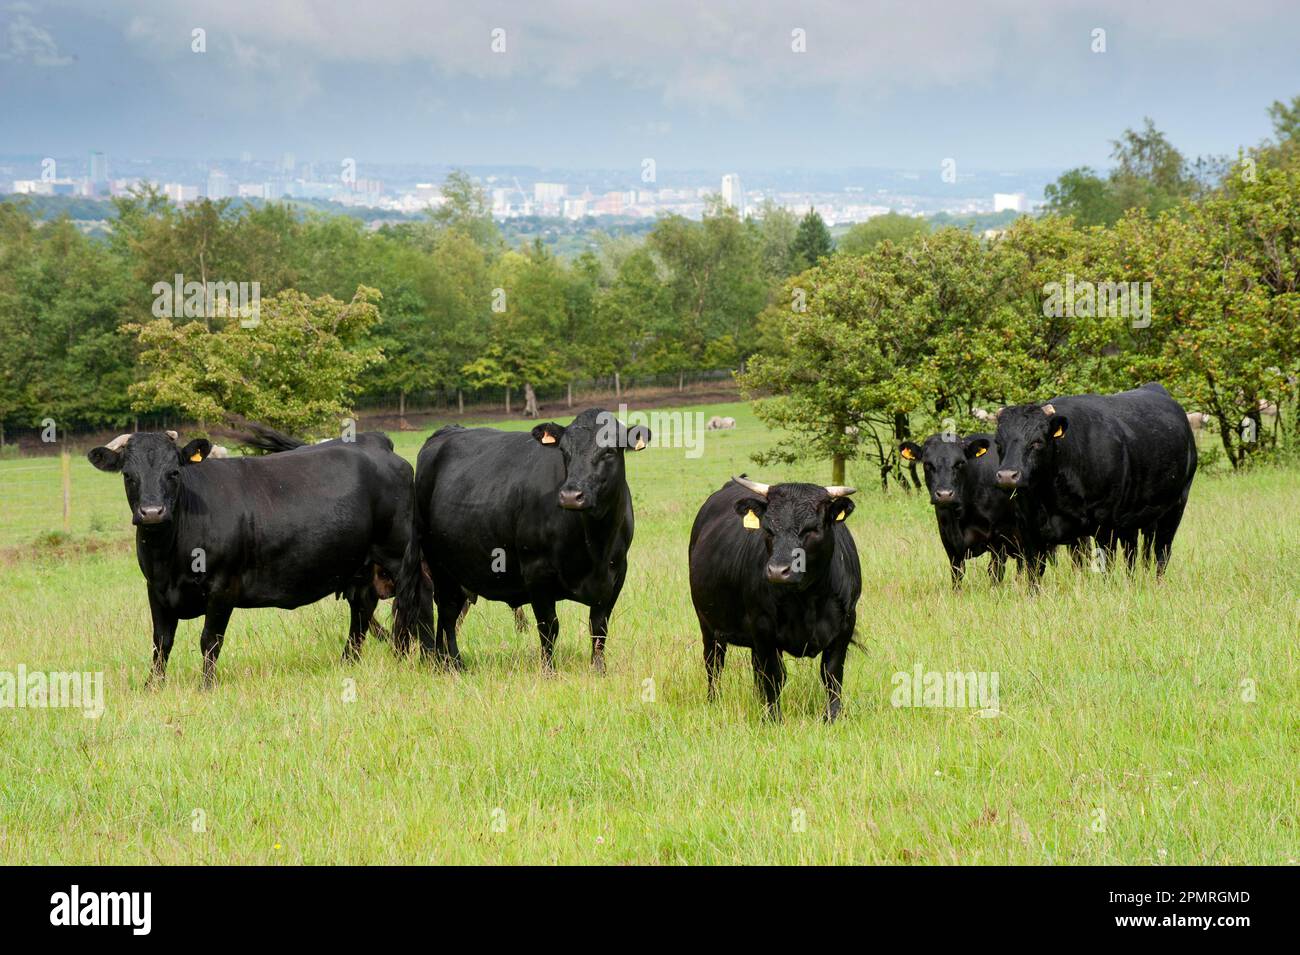 Domestic cattle, herd of Dexter cattle, standing in pasture with town in distance, Bradford, West Yorkshire, England, United Kingdom Stock Photo